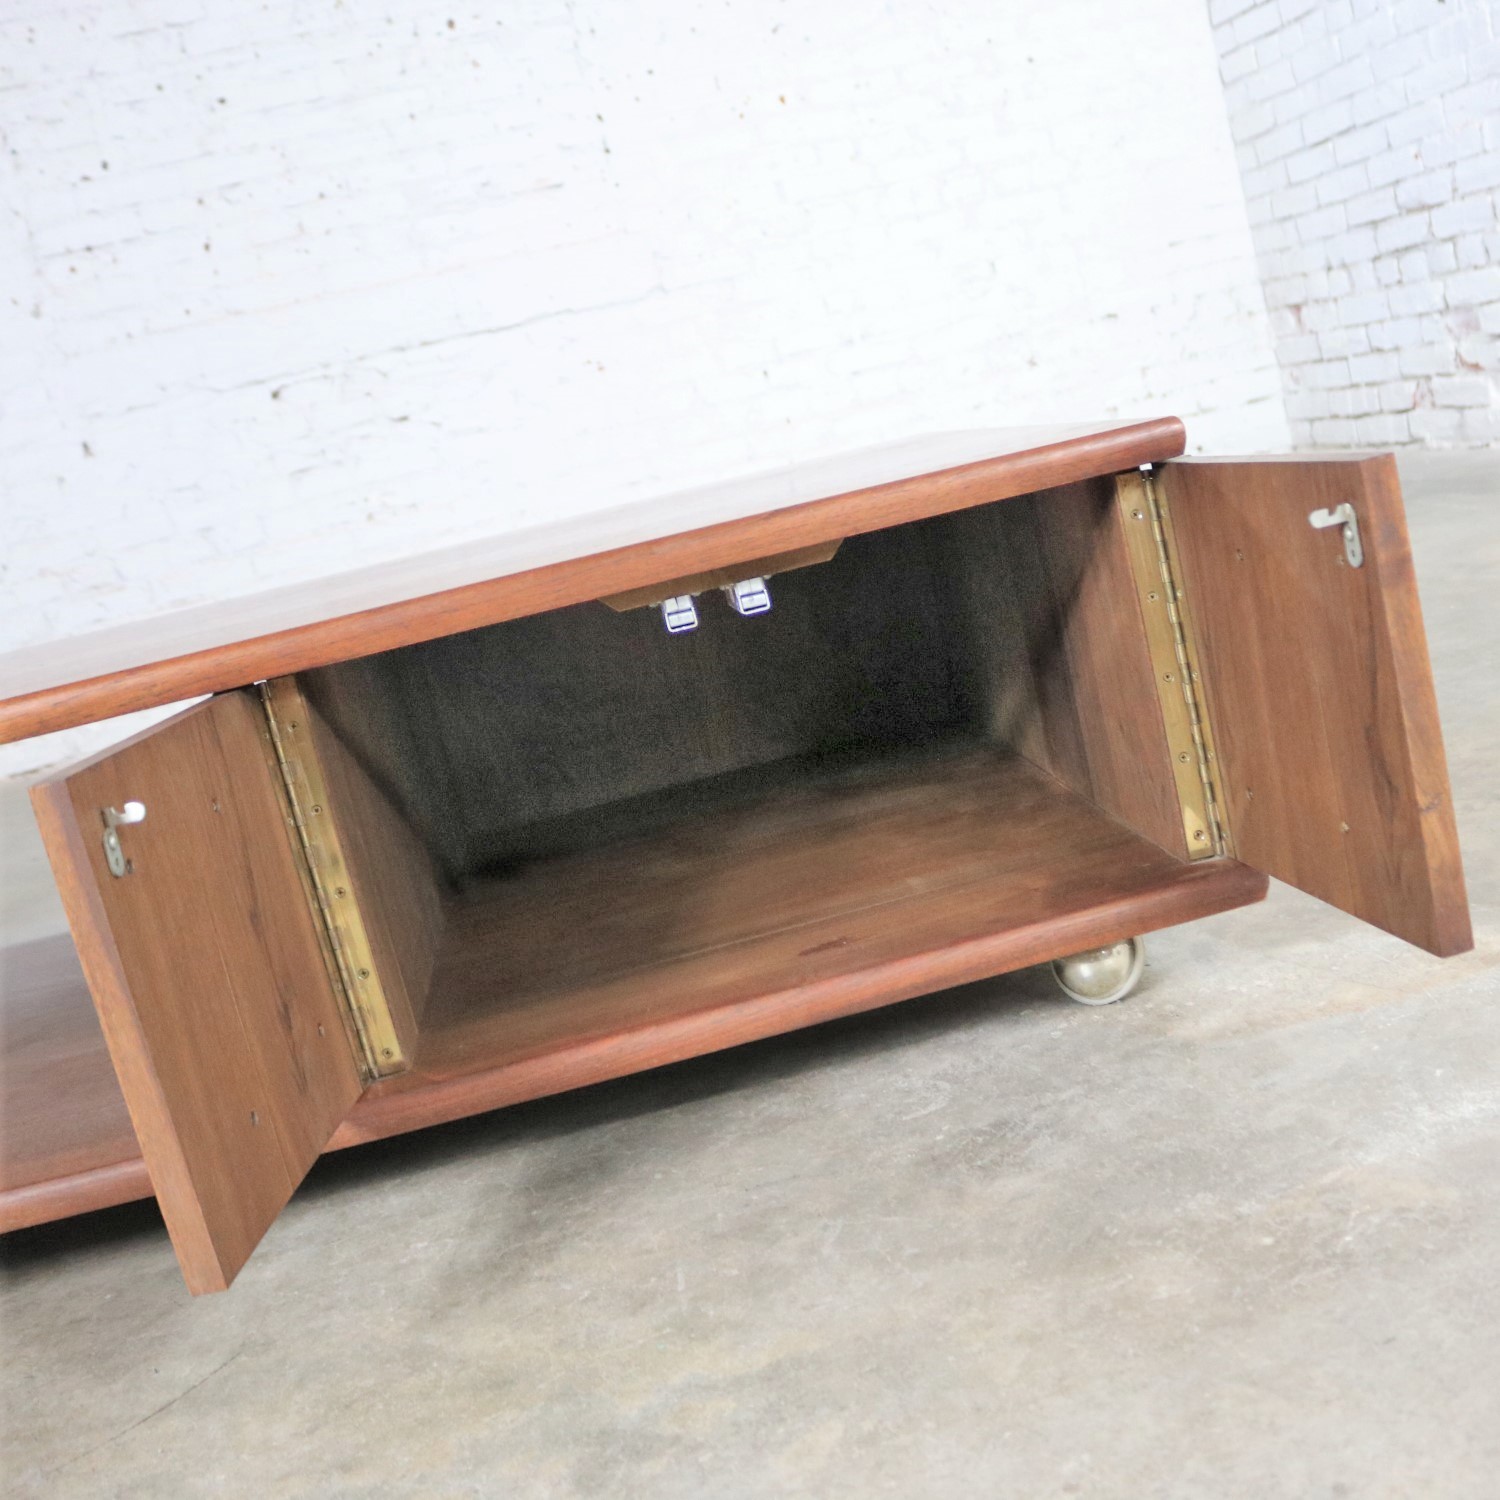 Low Slung Walnut Mid Century Rectangular Coffee Table with Storage on Casters